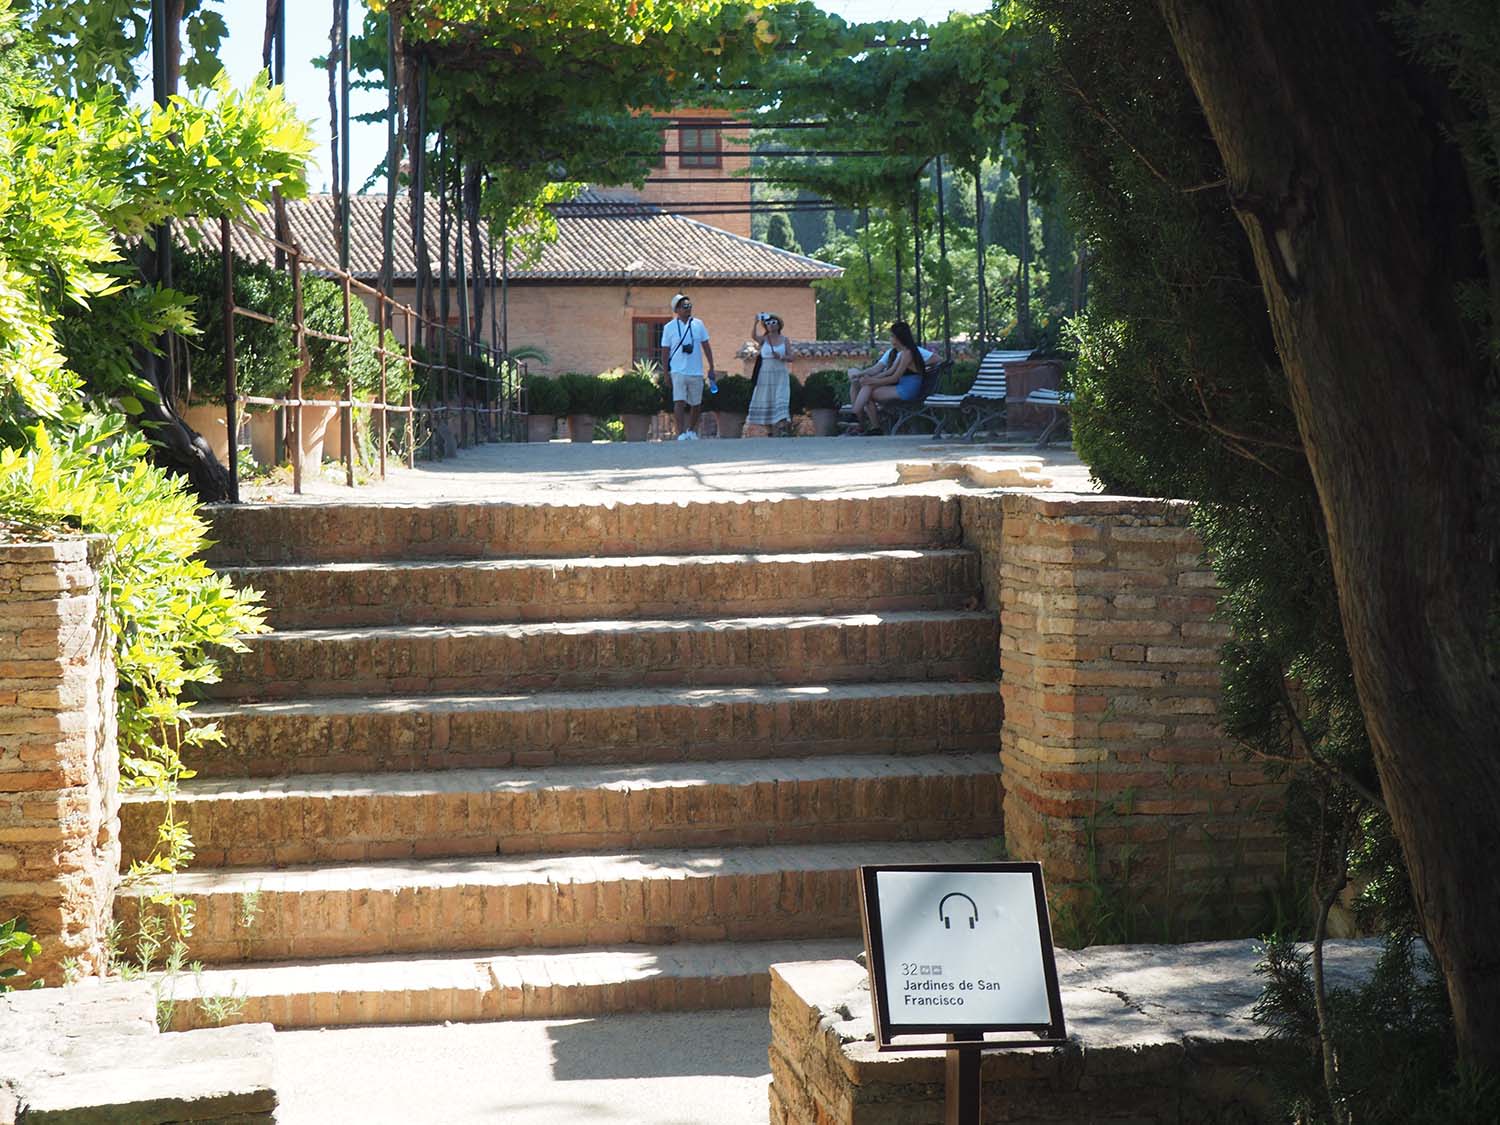 Stairs in the Jardines de San Francisco